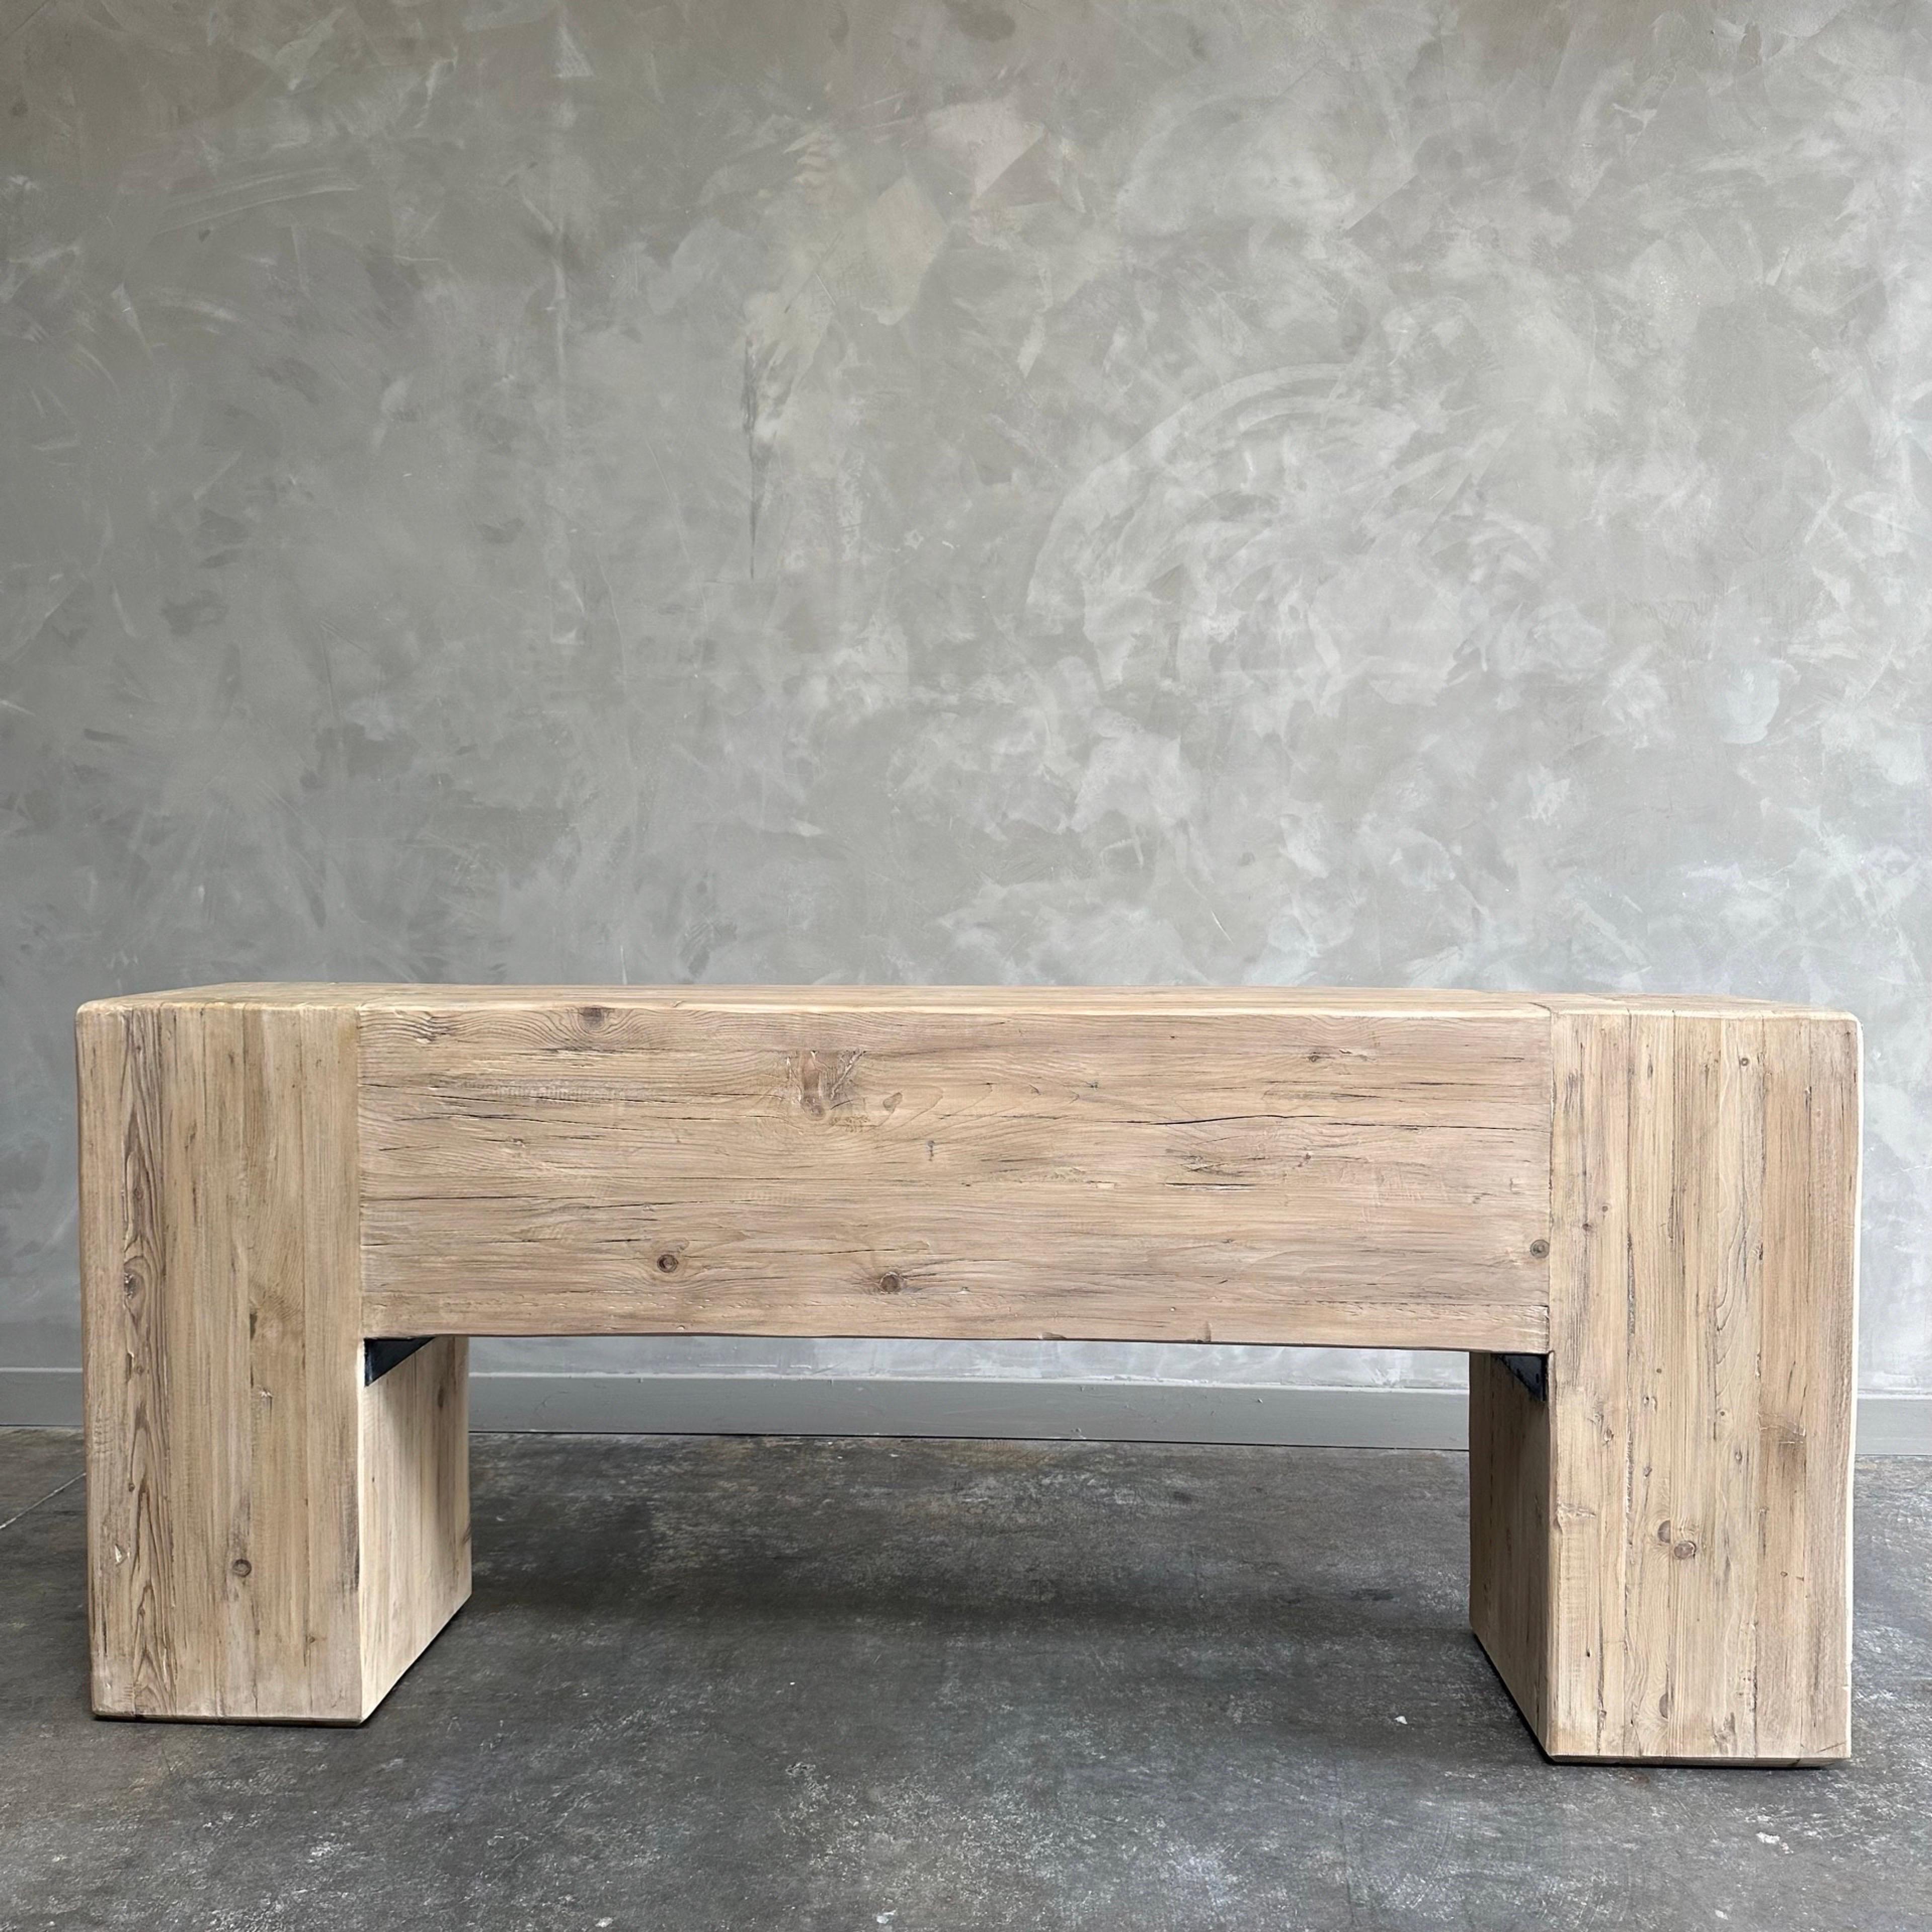 Custom made beam style console table by bloom home inc. 
These old elm and reclaimed pine timbers show in its most primal, natural form. The artisanal construction methods highlight the elm woods beautiful grain pattern & knots and fissures from its